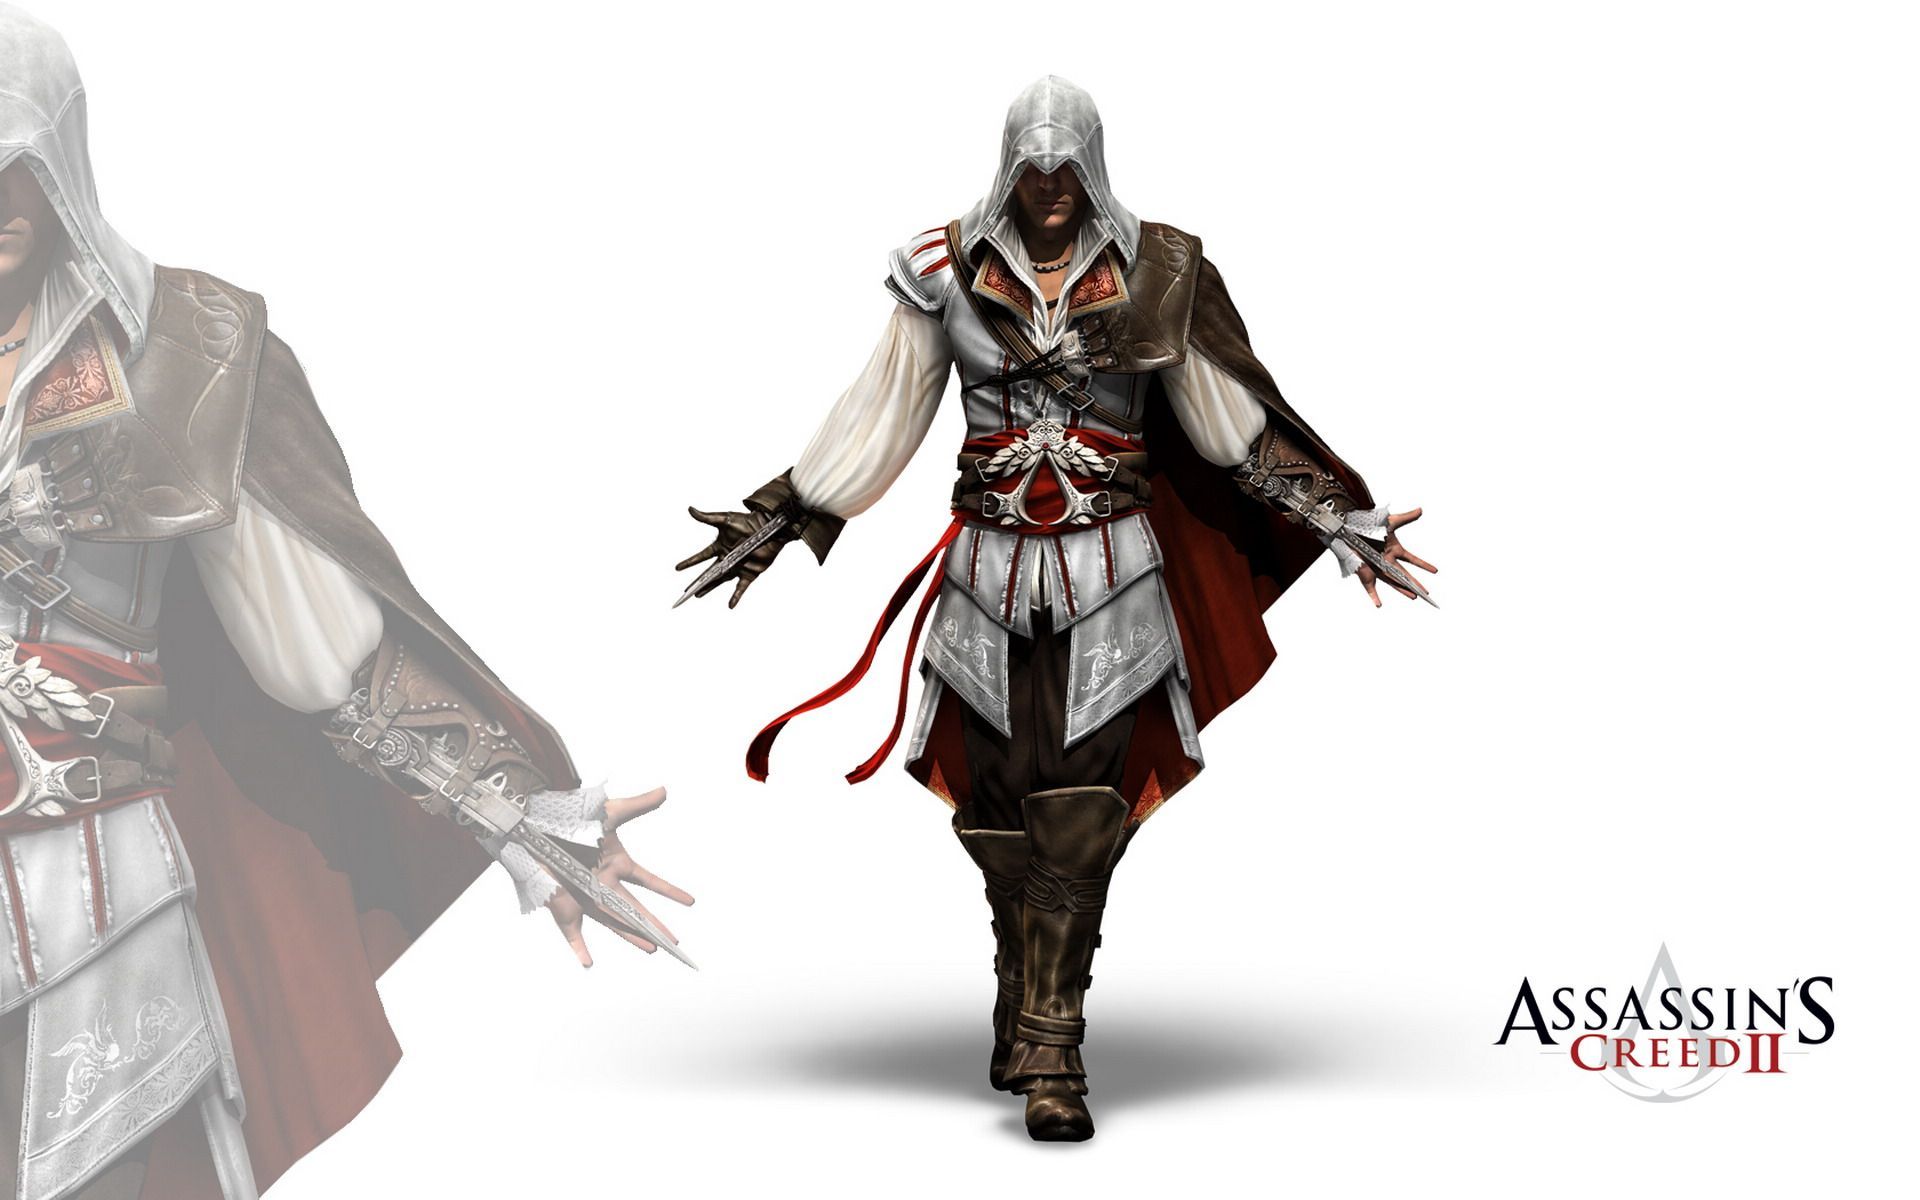 Assassin's Creed II Wallpapers | HD Wallpapers